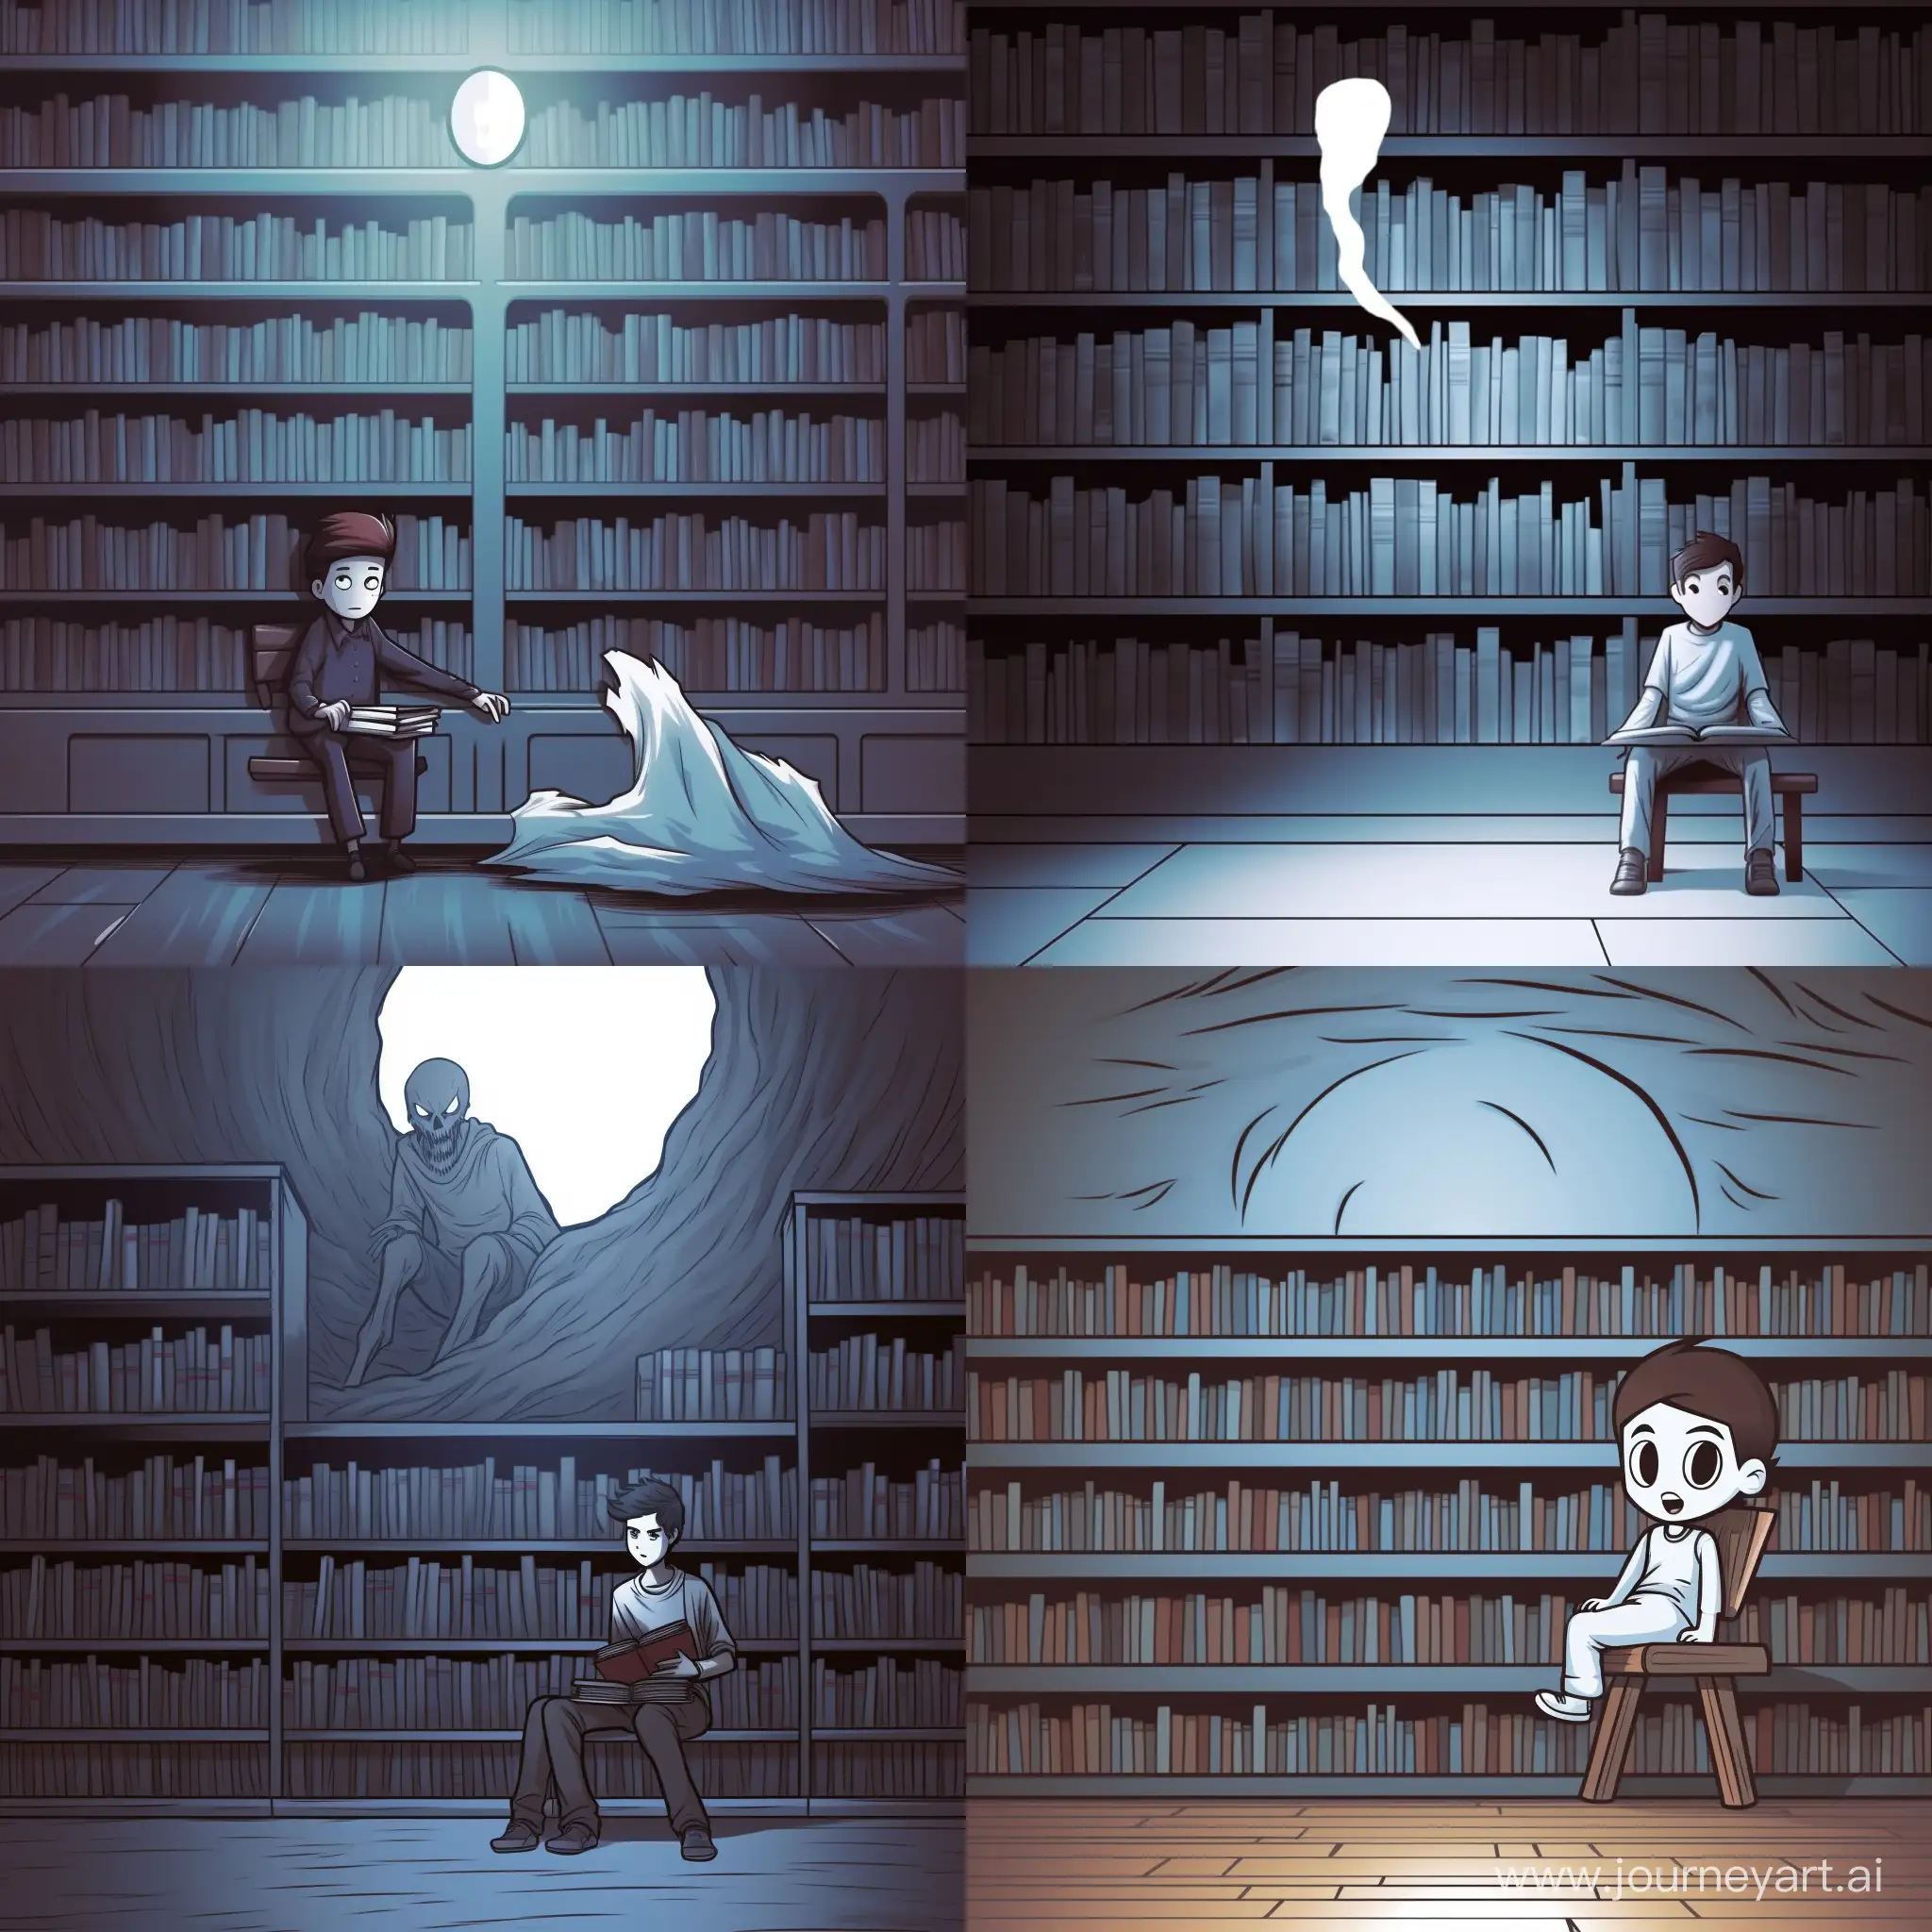 Studious-Student-Immersed-in-Book-with-Playful-Ghost-Comic-Style